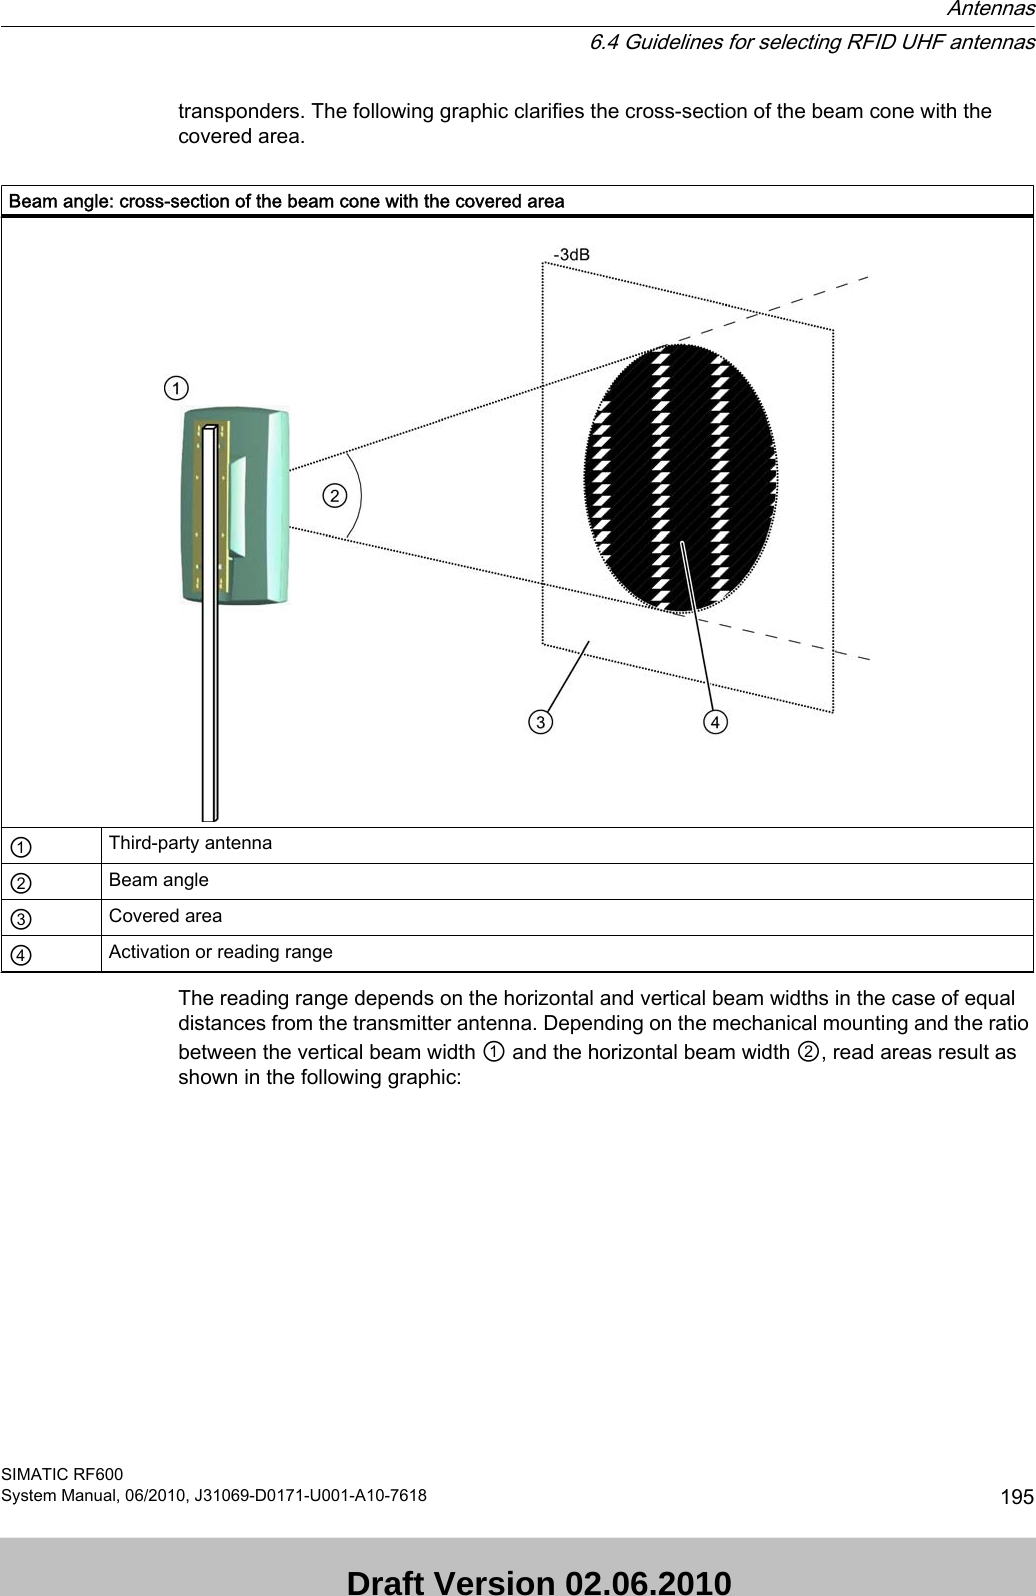 transponders. The following graphic clarifies the cross-section of the beam cone with the covered area.  Beam angle: cross-section of the beam cone with the covered area①Third-party antenna②Beam angle③Covered area④Activation or reading rangeThe reading range depends on the horizontal and vertical beam widths in the case of equal distances from the transmitter antenna. Depending on the mechanical mounting and the ratio between the vertical beam width ① and the horizontal beam width ②, read areas result as shown in the following graphic:  Antennas6.4 Guidelines for selecting RFID UHF antennasSIMATIC RF600System Manual, 06/2010, J31069-D0171-U001-A10-7618 195 Draft Version 02.06.2010 